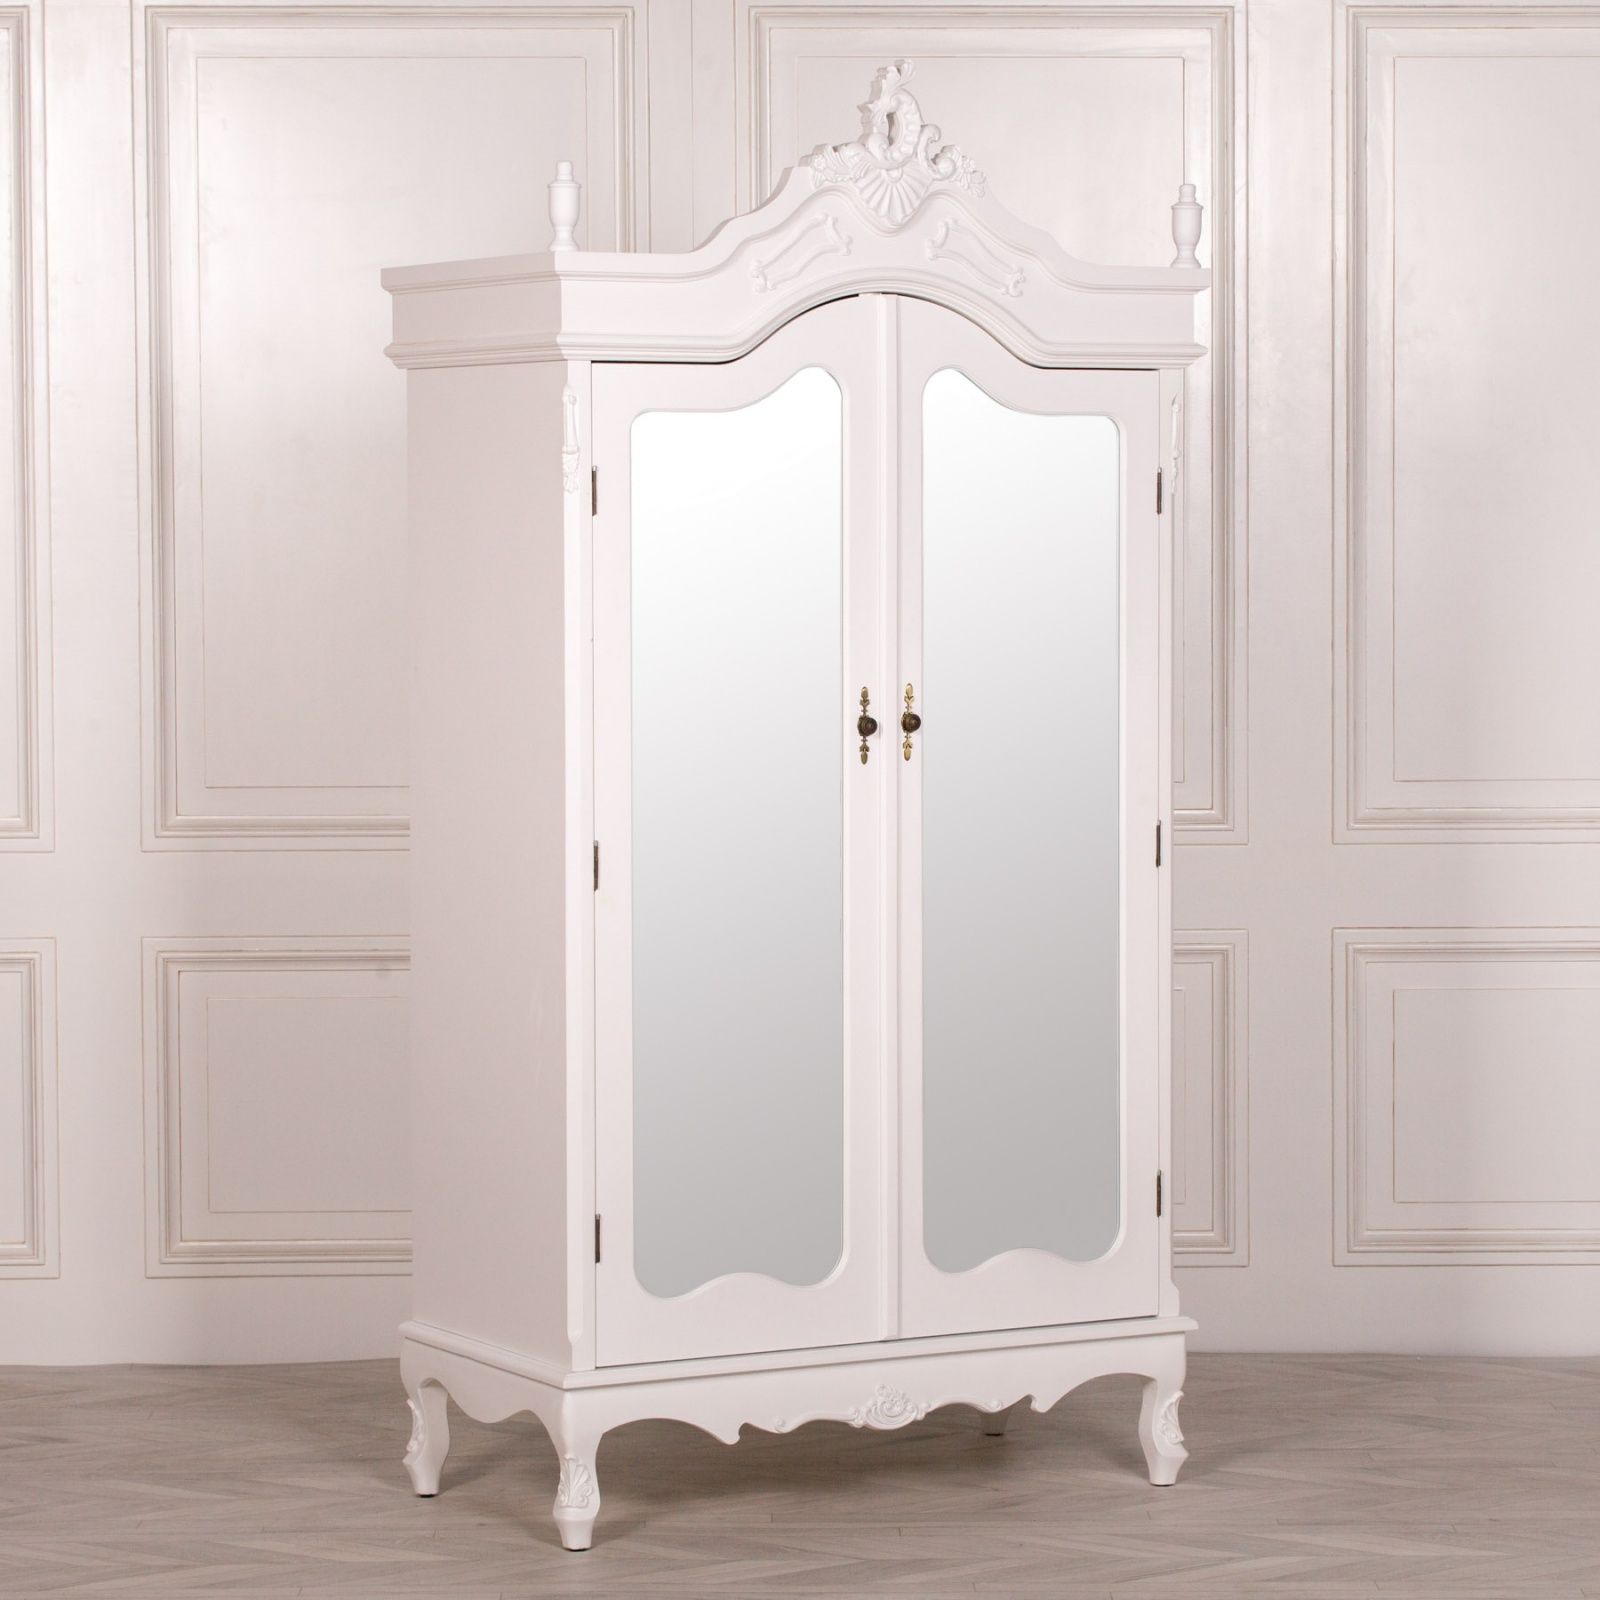 French Style Wardrobe White Mirrored Double Armoire Throughout French Style White Wardrobes (View 7 of 15)